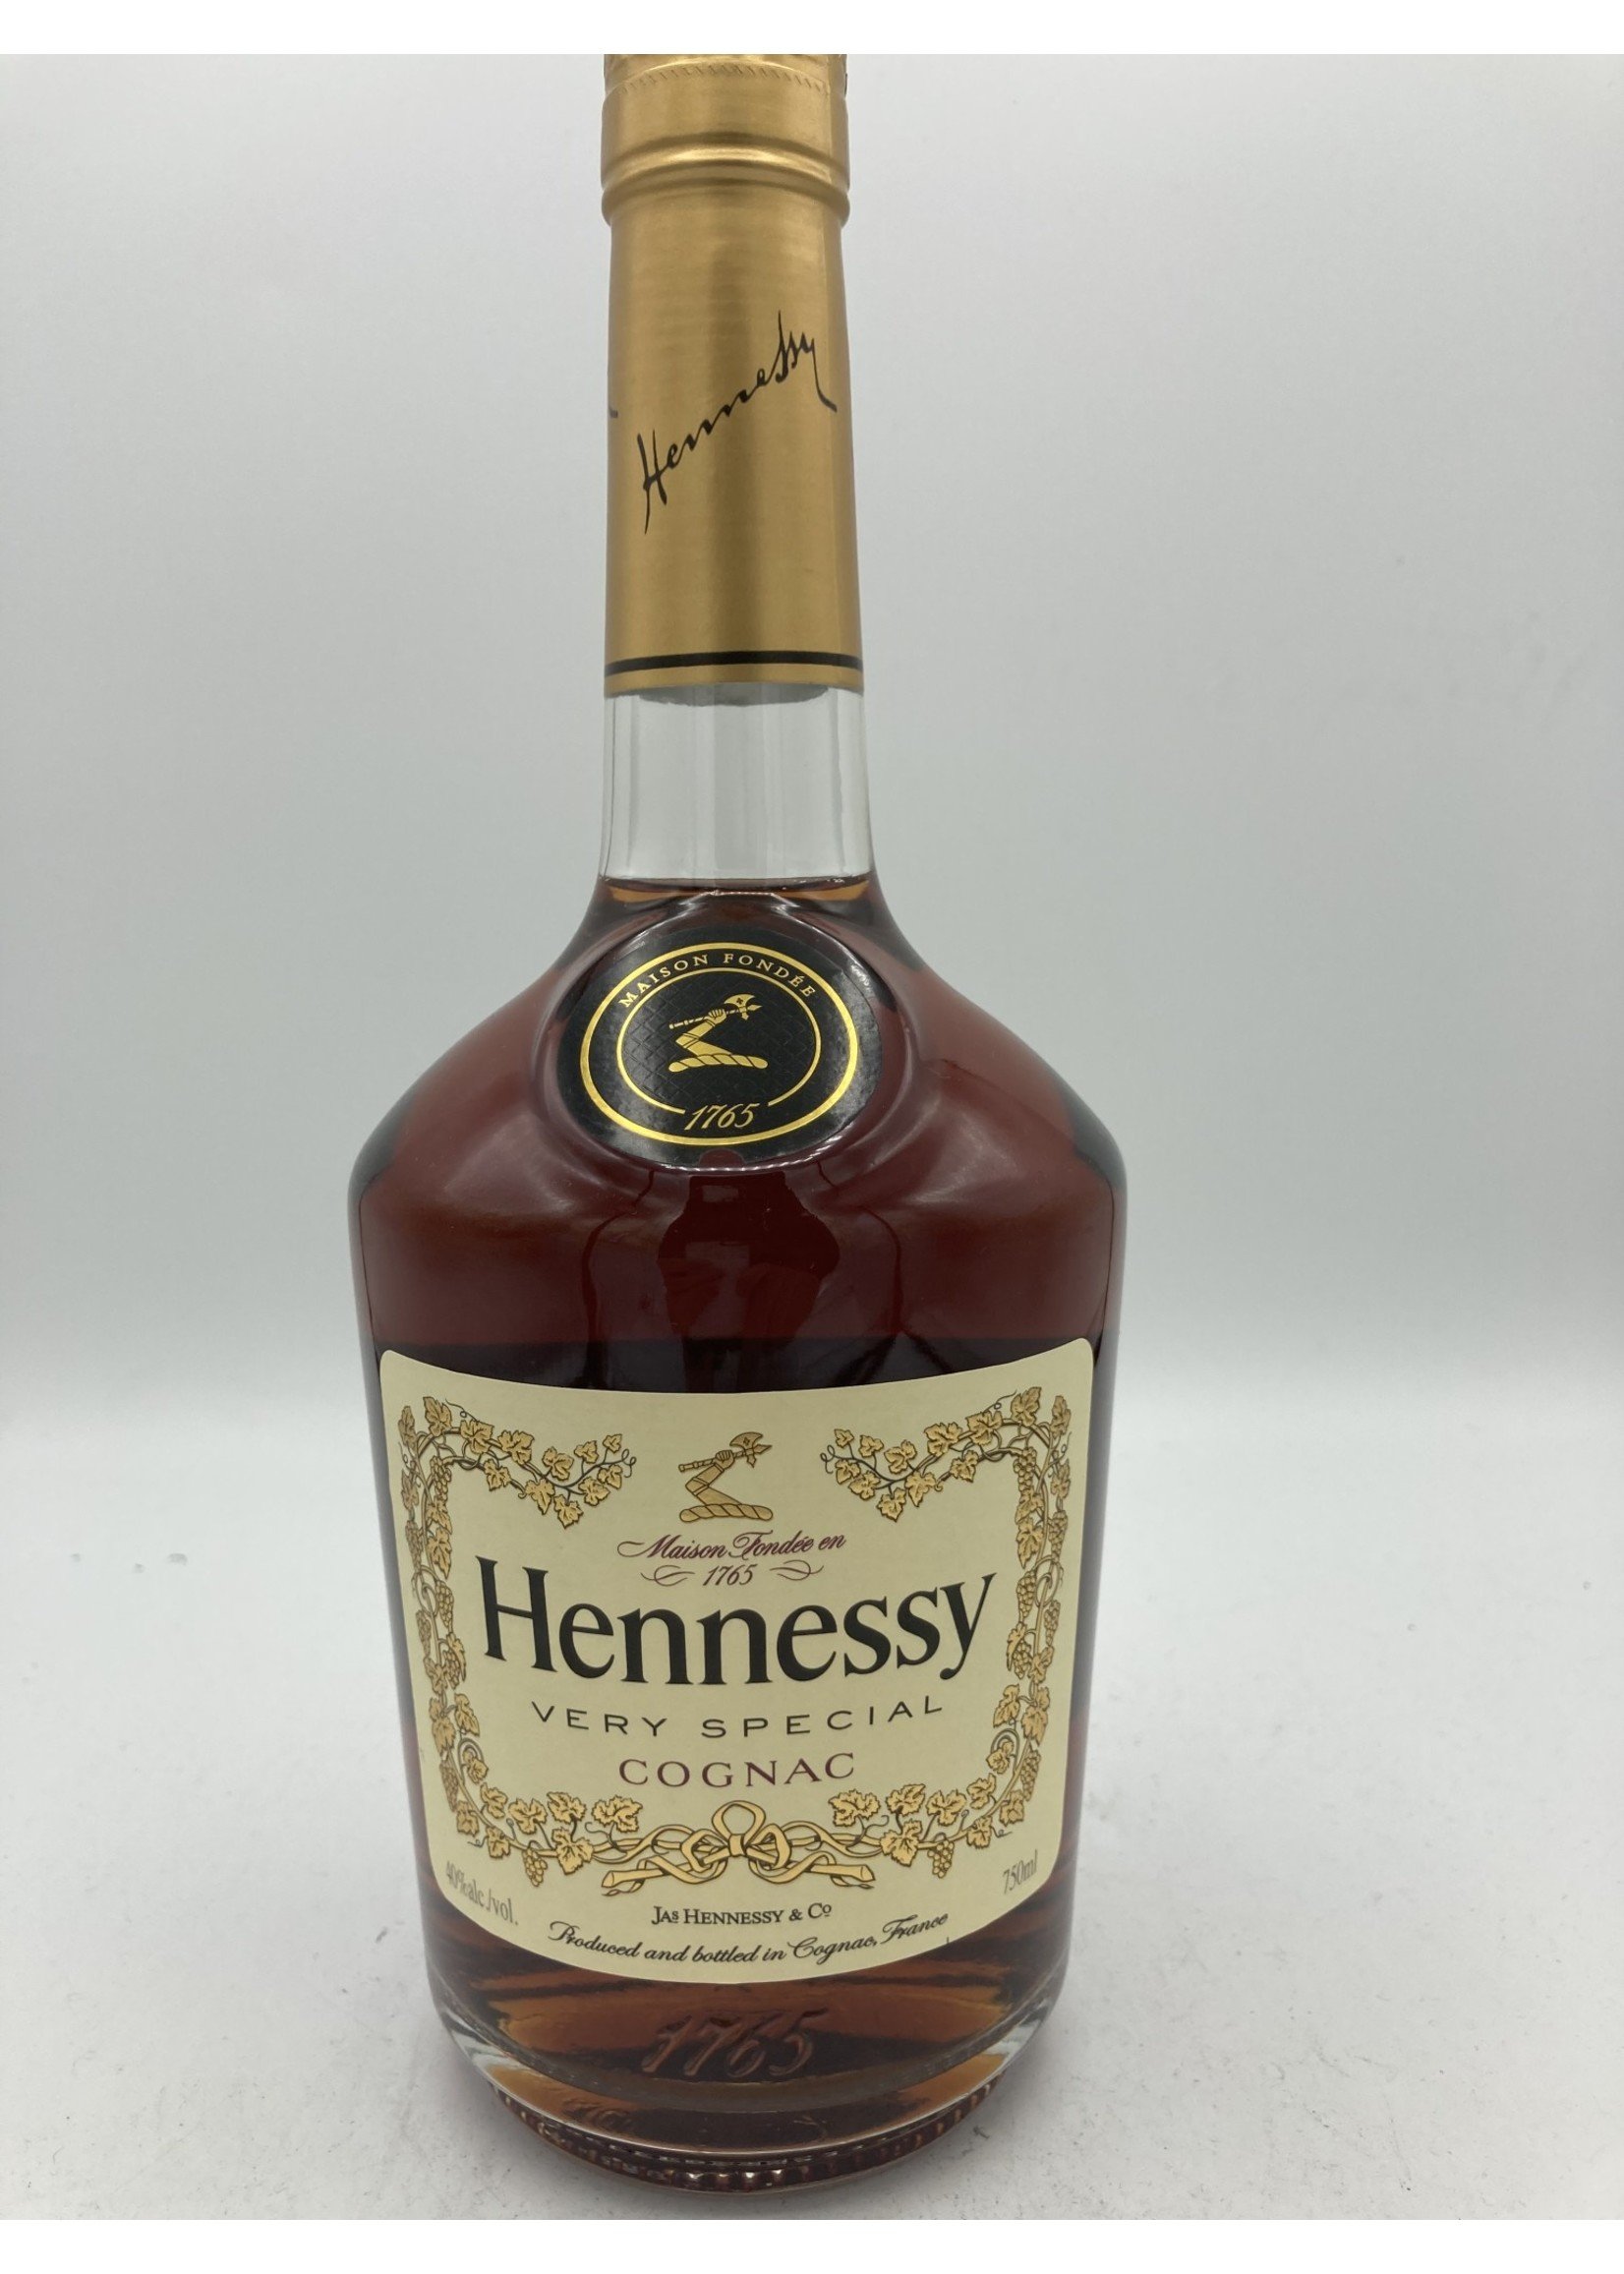 HENNESSY Very Special Cognac Empty Glass Liquor Bottle With 